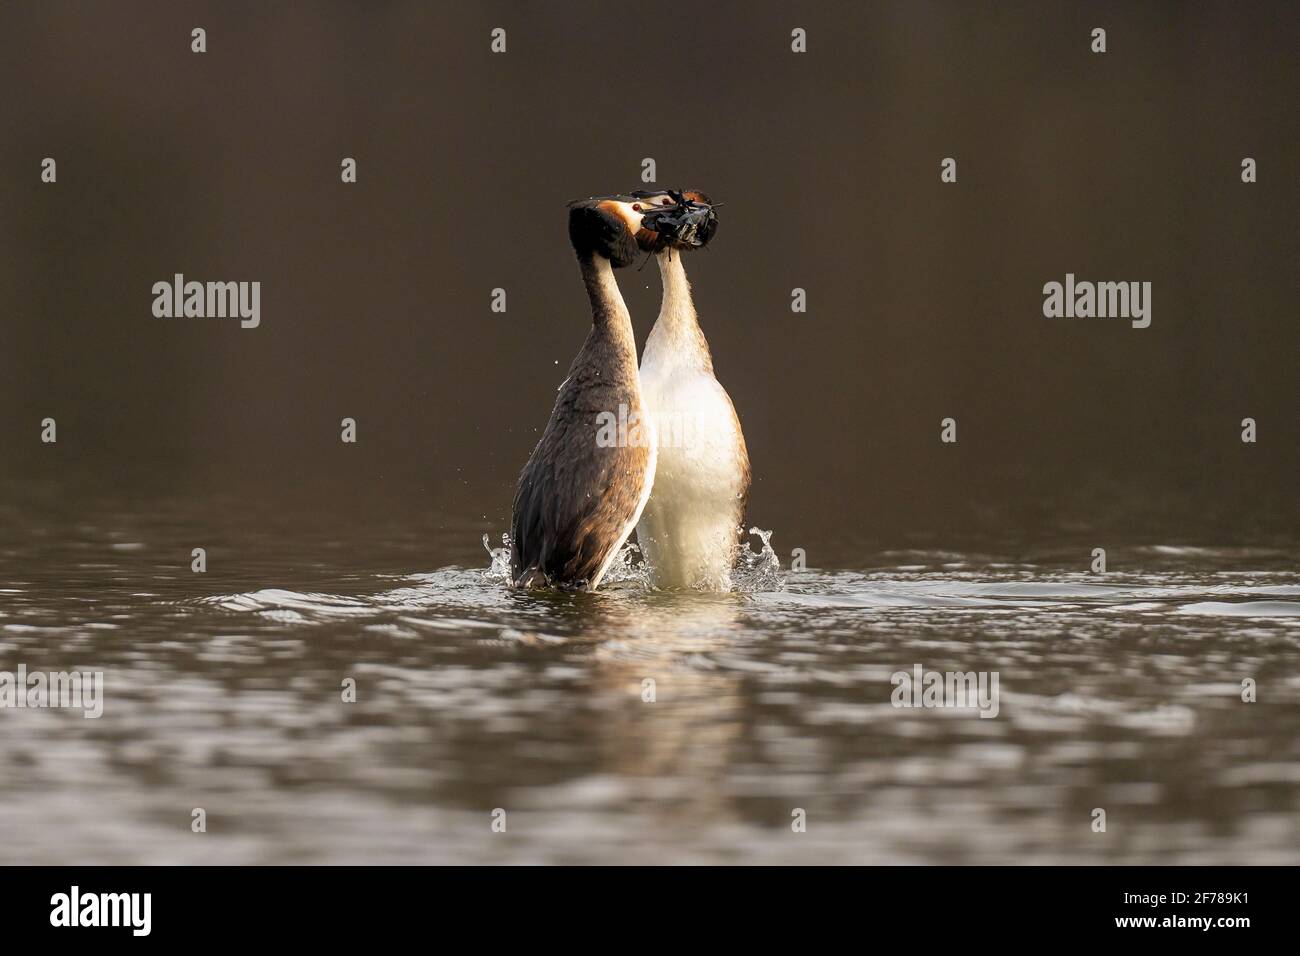 Great crested grebes (Podiceps cristatus) pair performing part of the courtship ritual known as the weed dance. Stock Photo